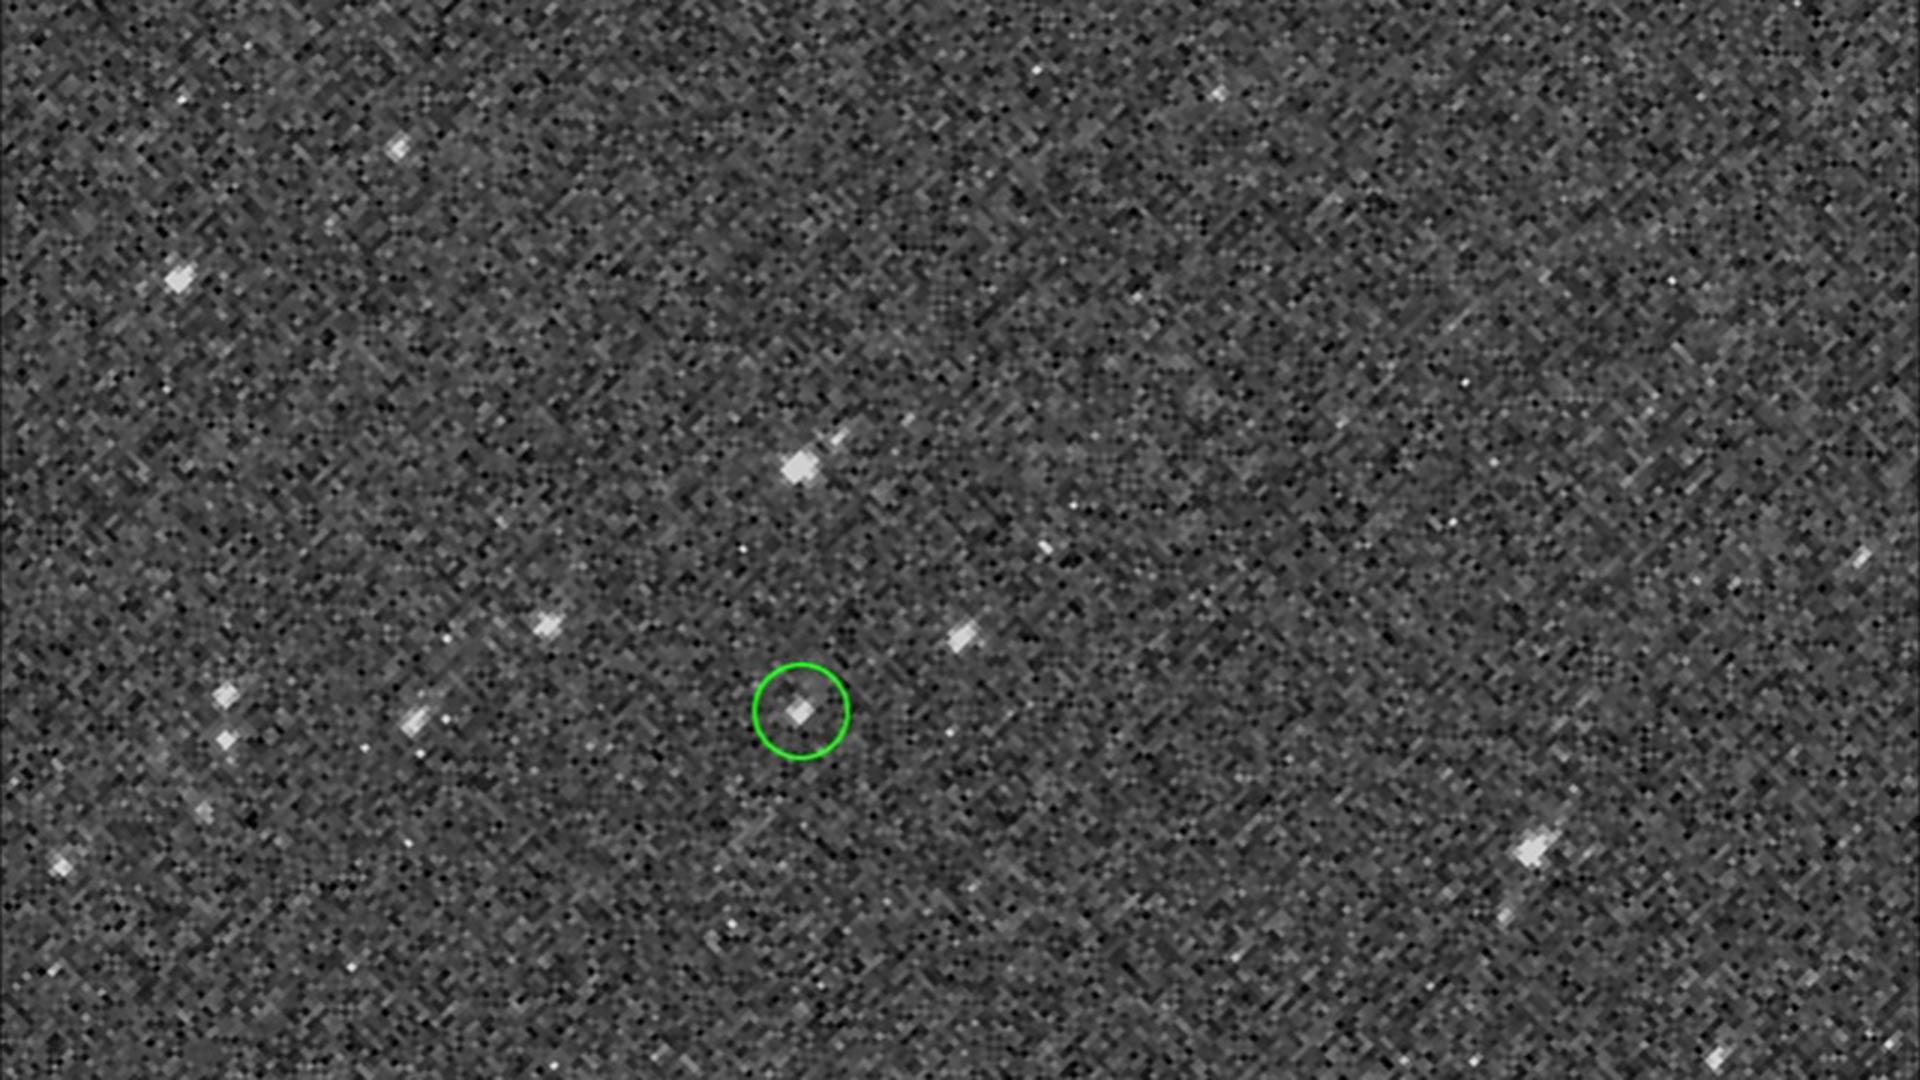 An Aug. 17 image of asteroid Bennu captured by Osiris-REx at 1.4 million miles. Eventually, the mission will approach the surface of the asteroid. 